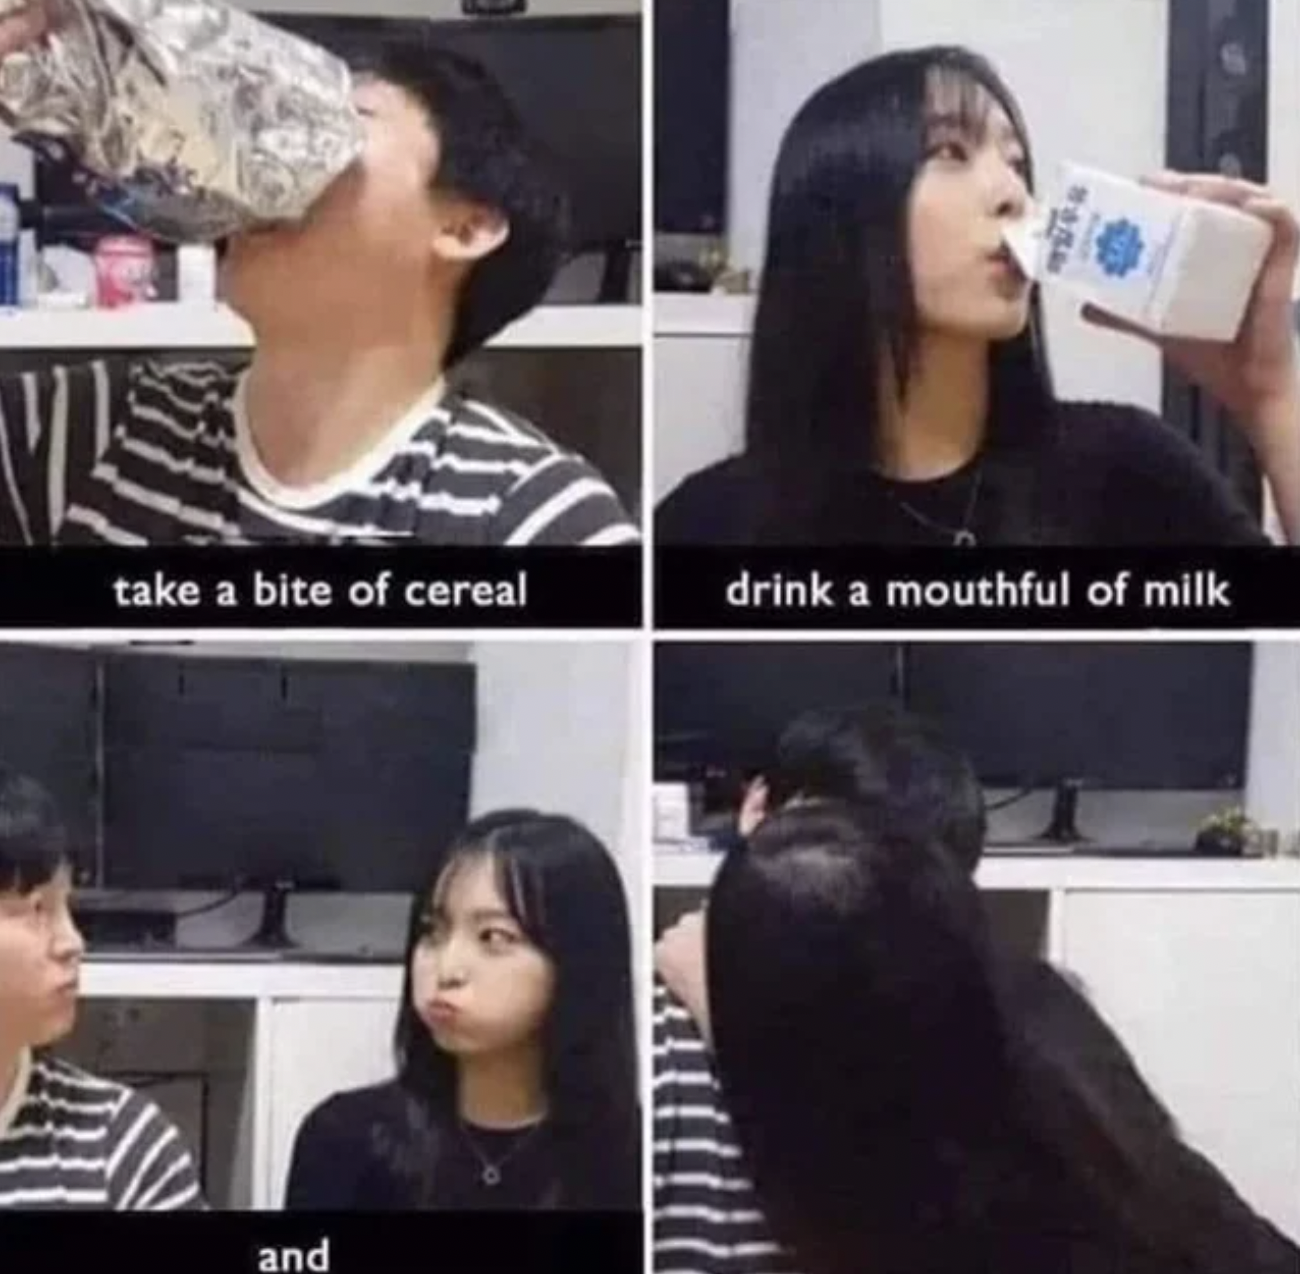 Cringey Pics - head - take a bite of cereal and Wage drink a mouthful of milk